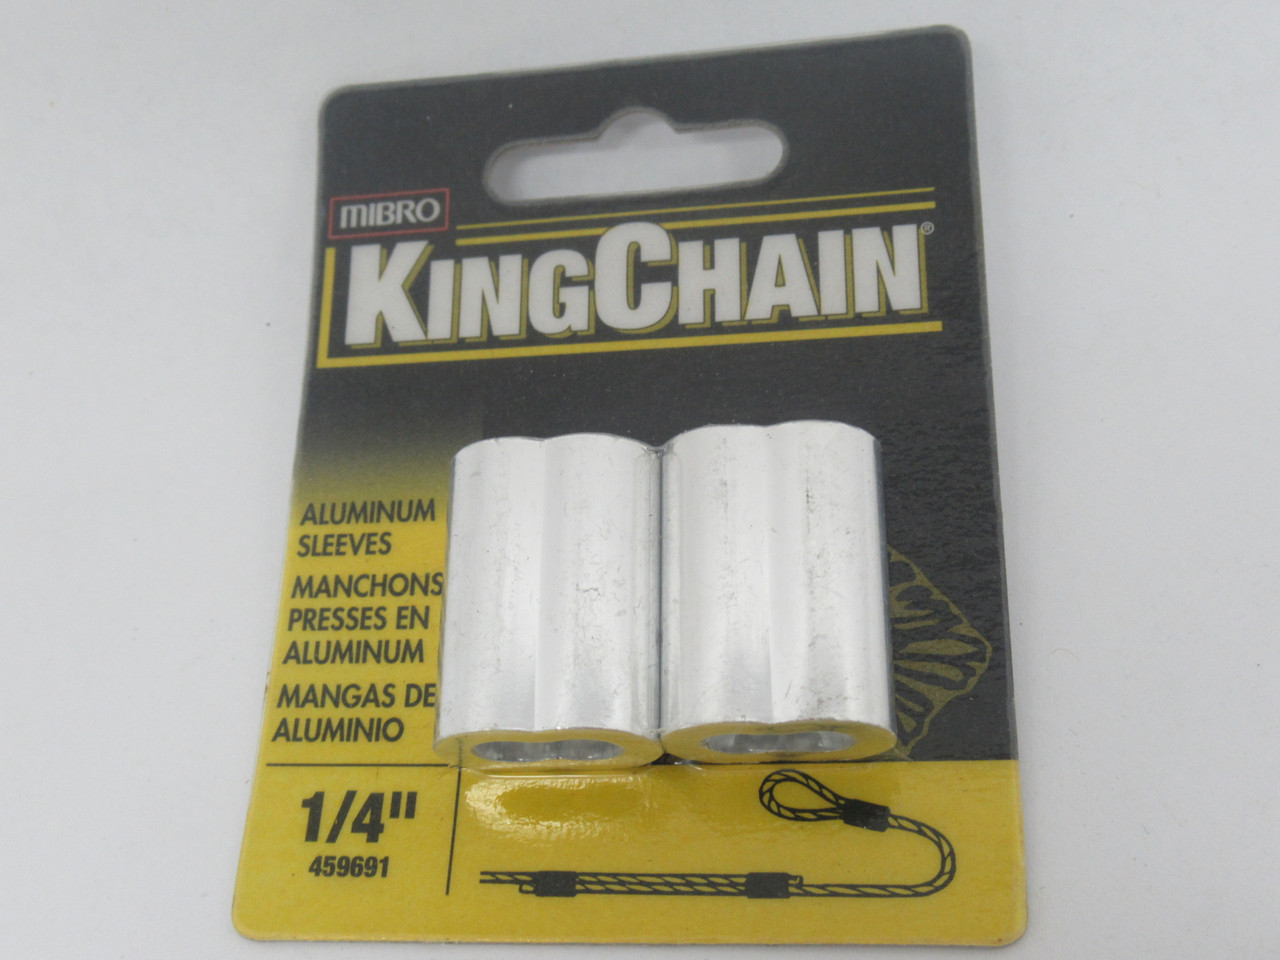 King Chain 459691 1/4" Aluminum Sleeves 2-Pack NEW